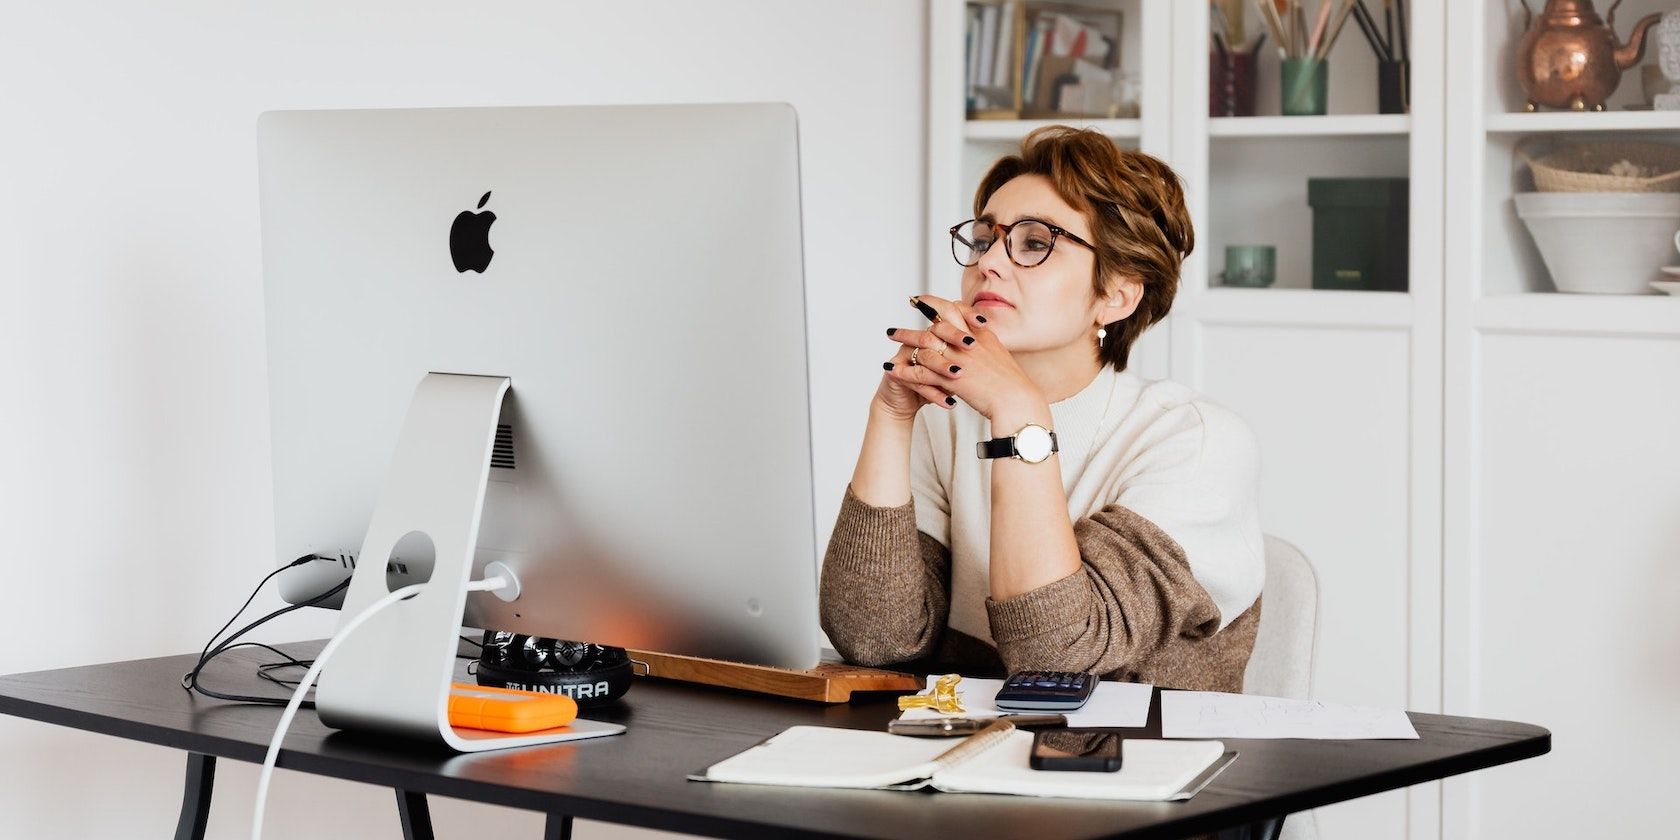 Woman With Glasses Thinking While Using iMac